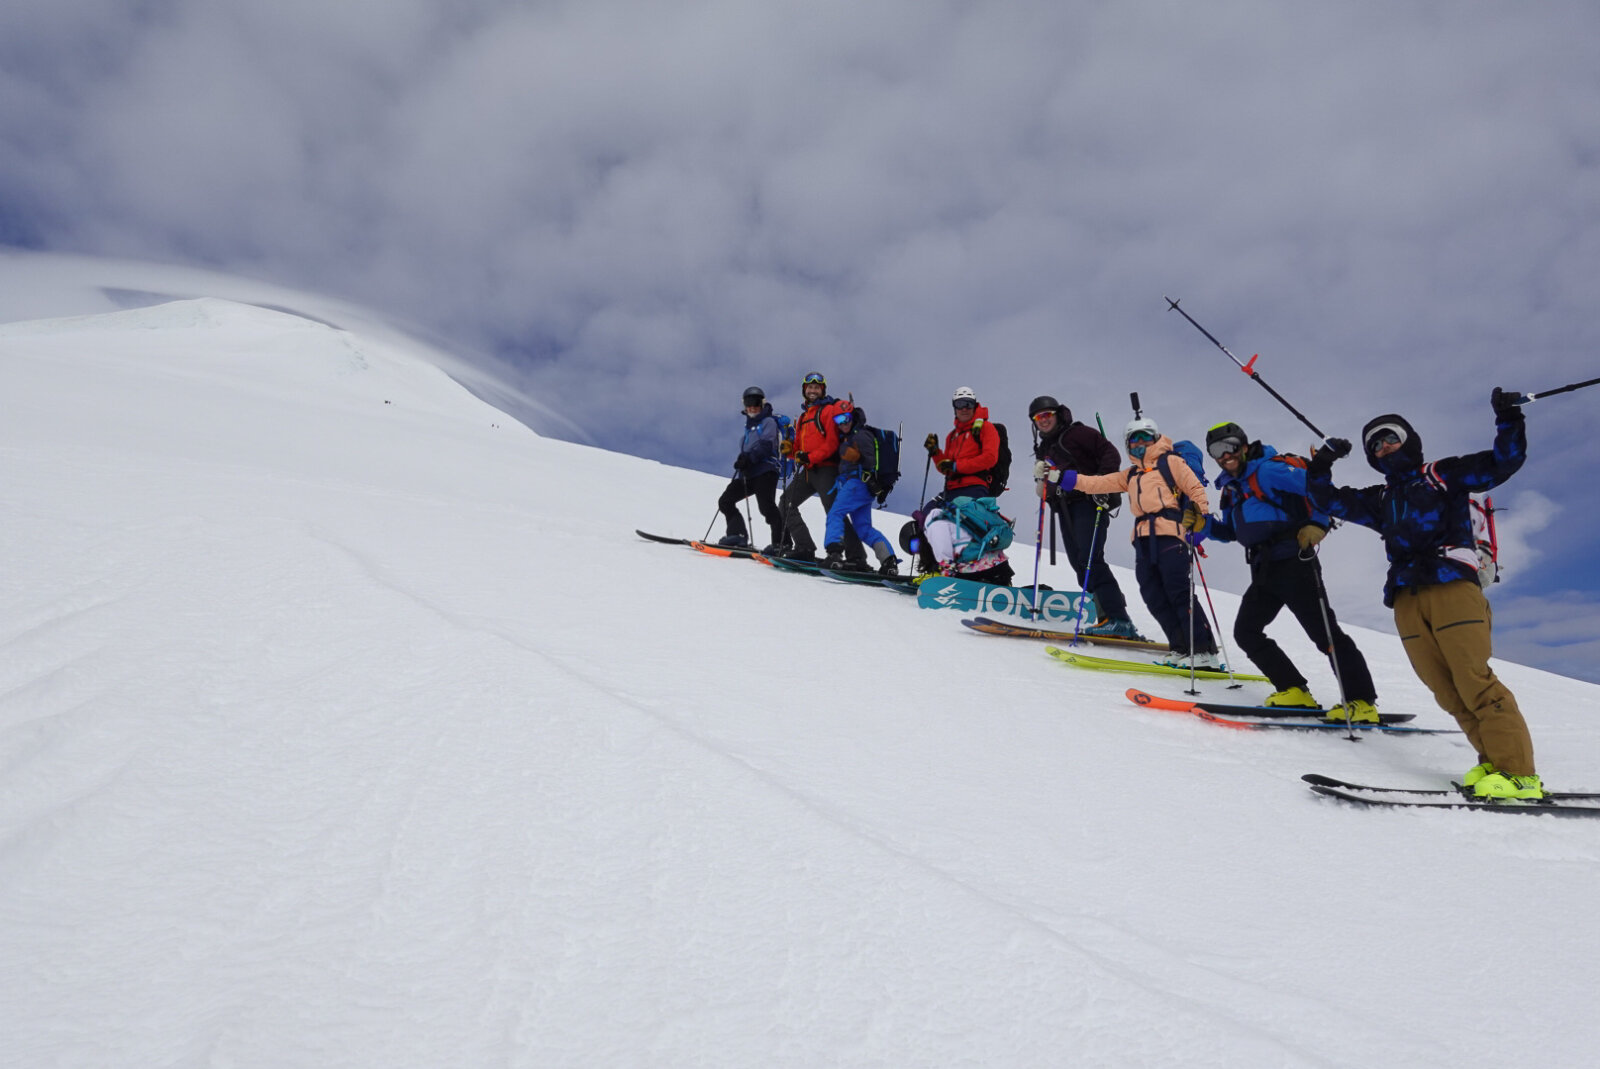 Group of ski mountaineers on the slope of a 6,000m peak in Chile with Alpenglow Expeditions' professionally guided ski mountaineering trip to Chile.